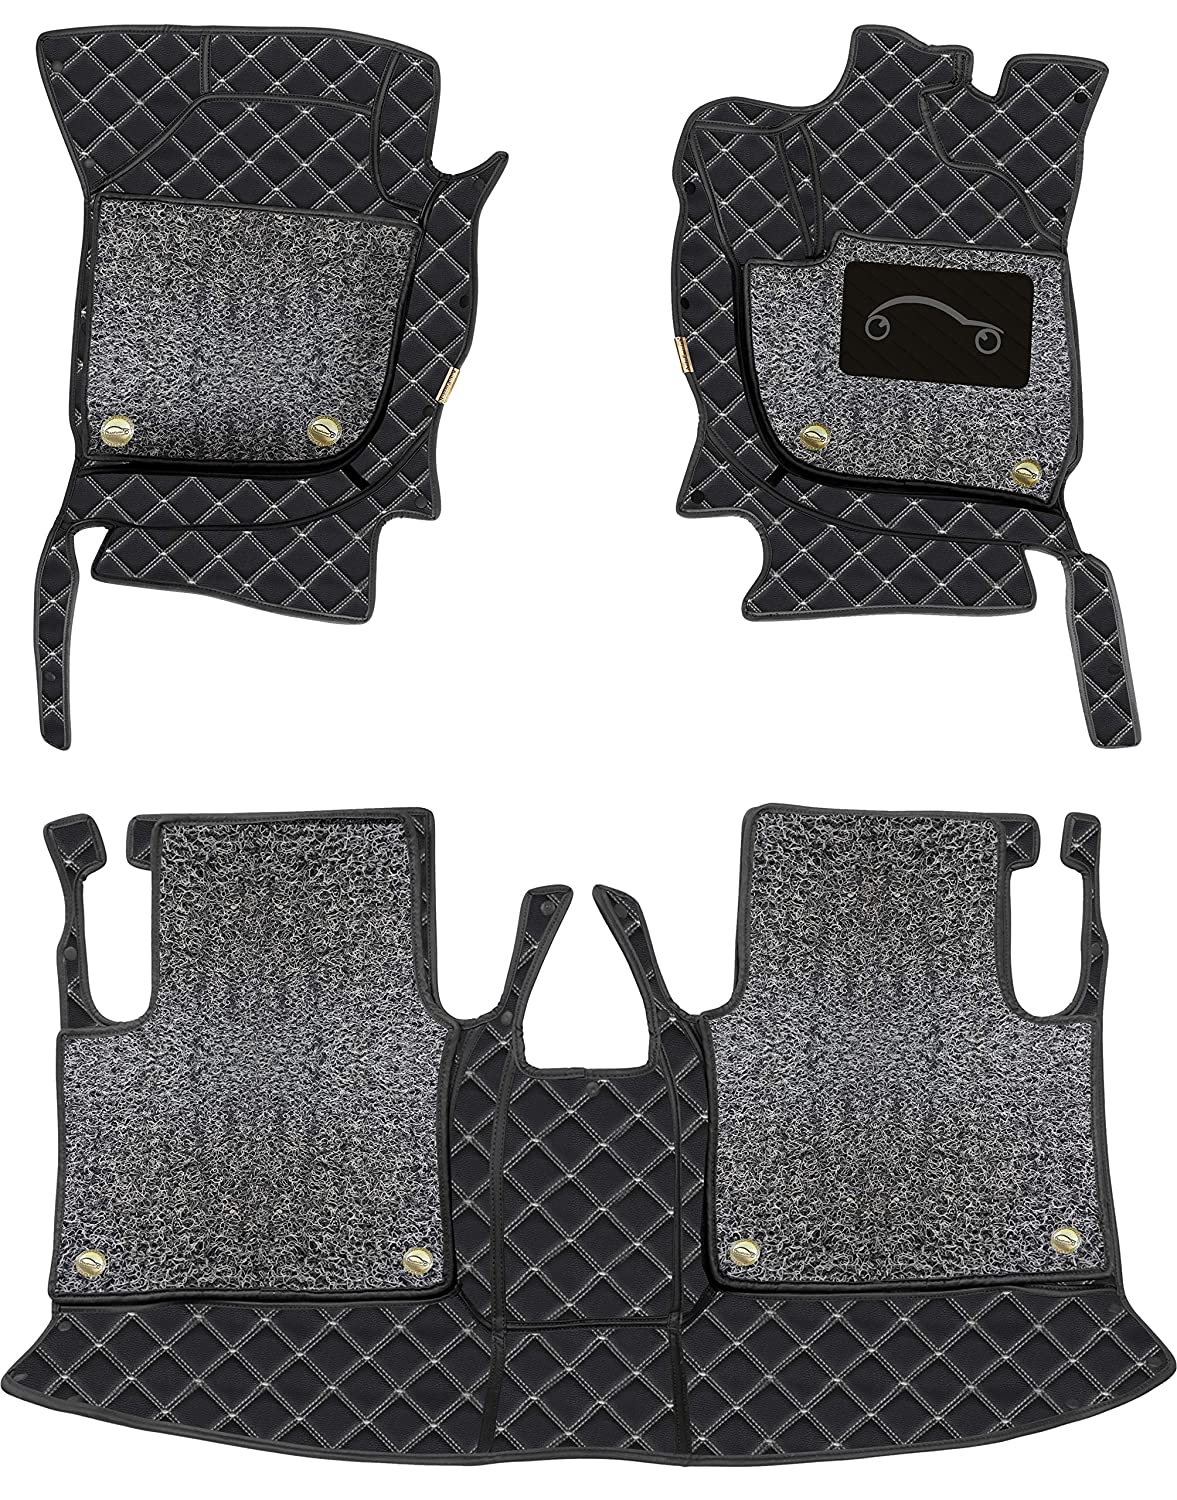 Mercedes EQS 580 4 Matic 2023-7D Luxury Car Mat, All Weather Proof, Anti-Skid, 100% Waterproof & Odorless with Unique Diamond Fish Design (24mm Luxury PU Leather, 2 Rows)